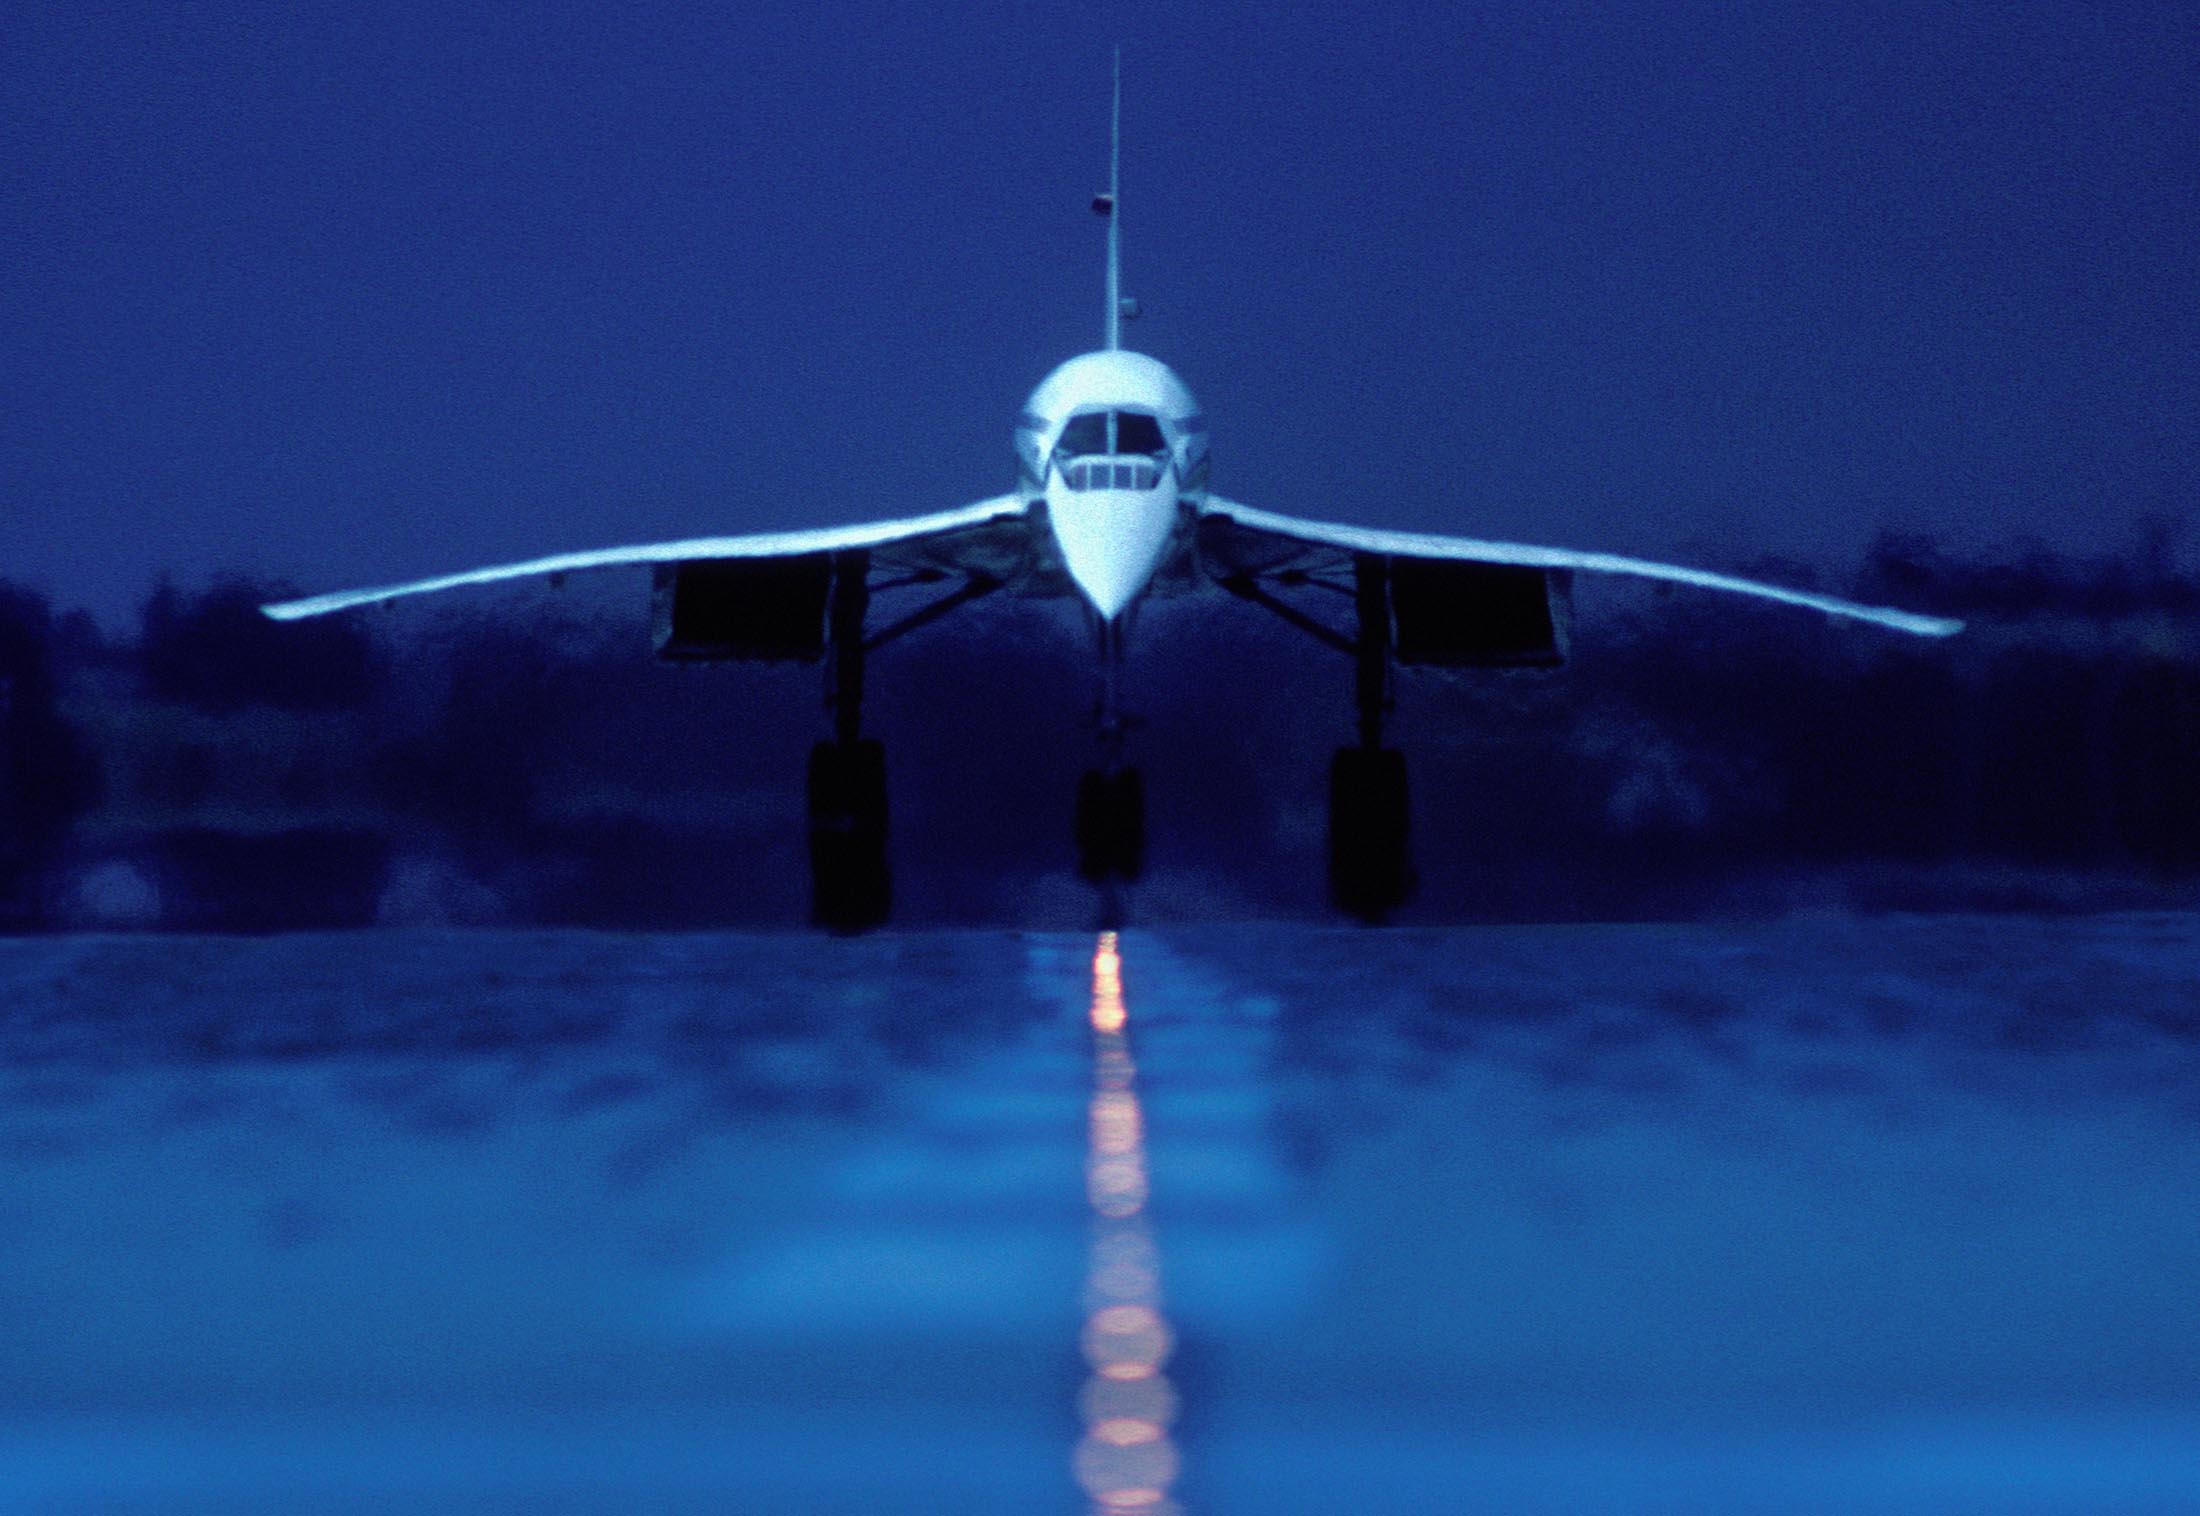 Supersonic Flight Is Around the CornerBut Why Is It Taking So Long?